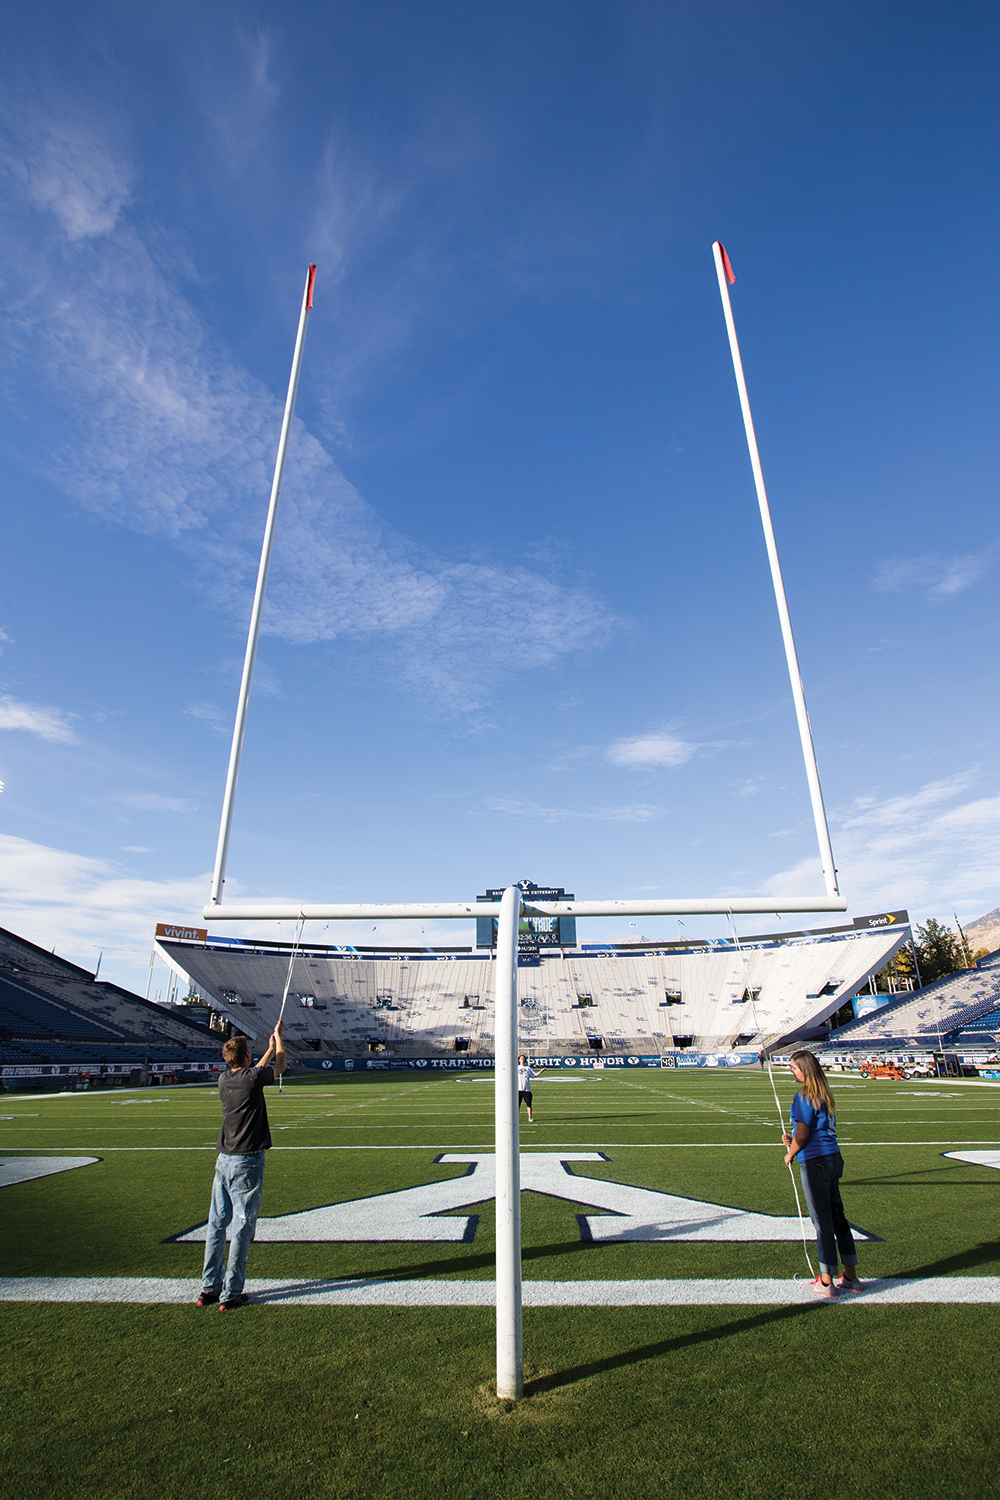 Student employees level the goal posts at LaVell Edwards Stadium before kickoff.